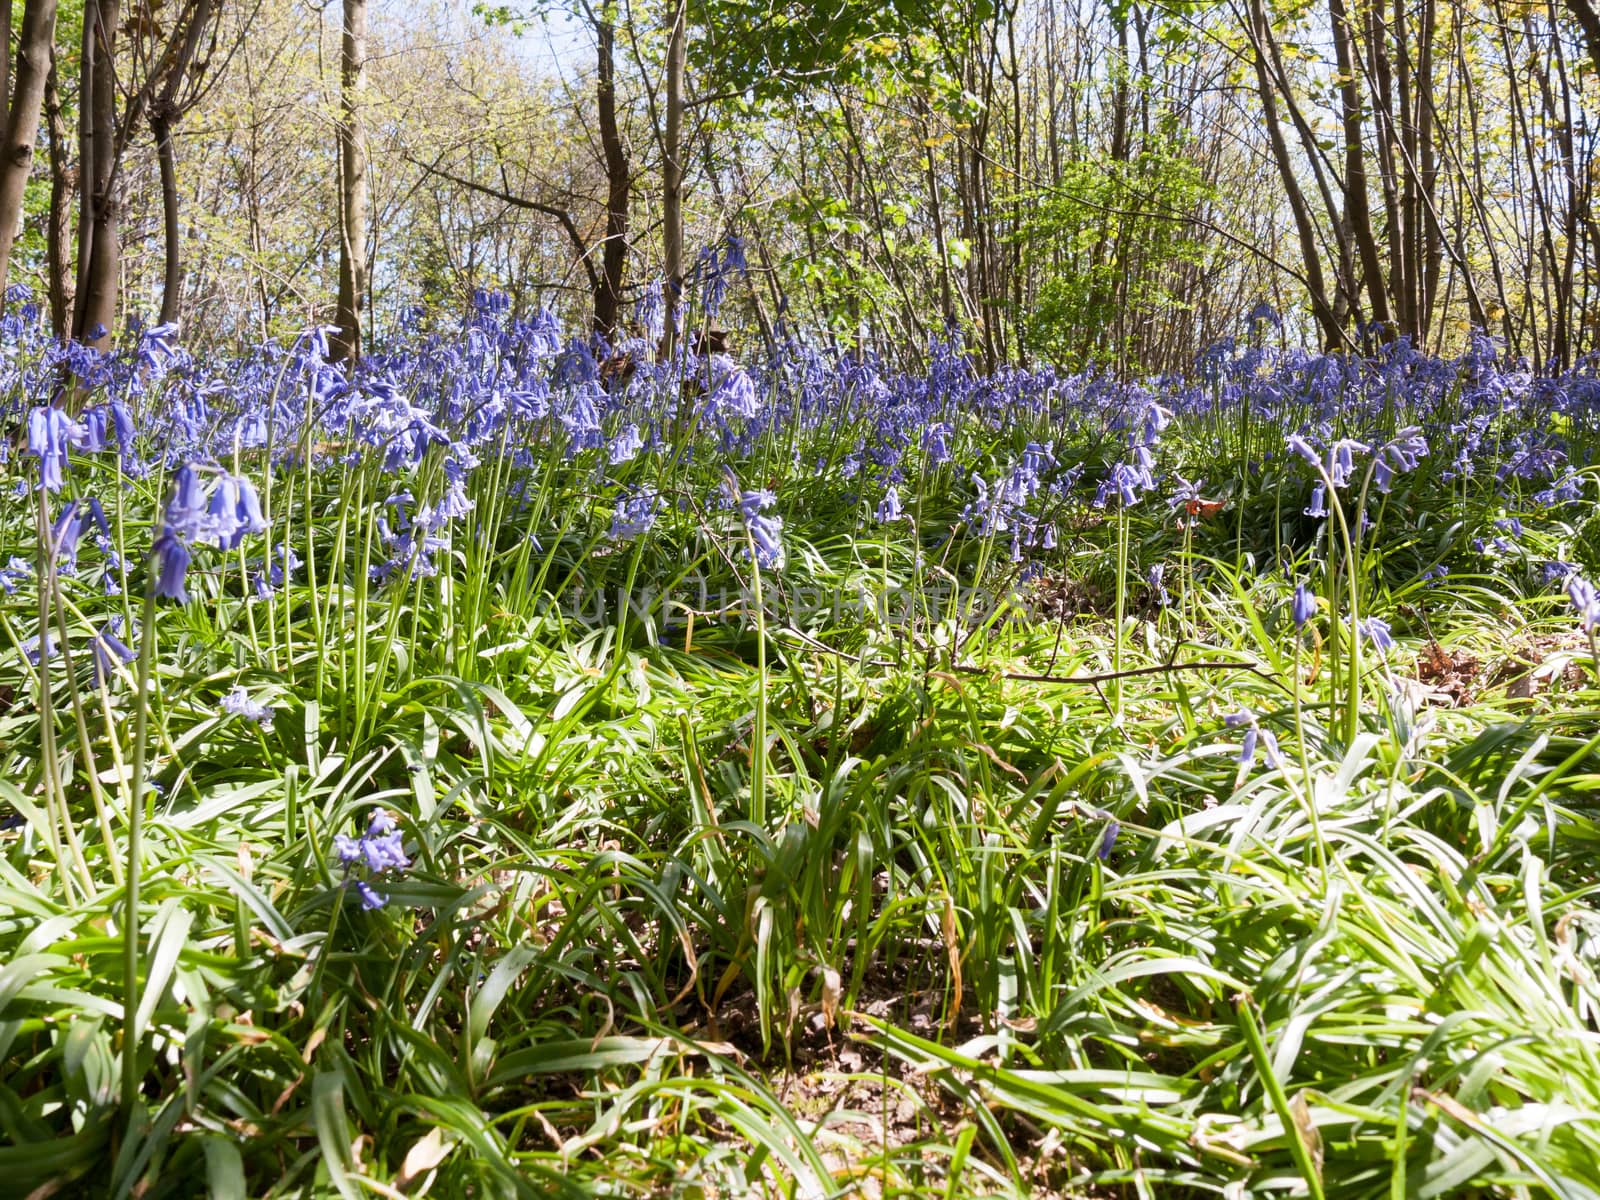 close up of bluebells growing on forest floor in spring by callumrc